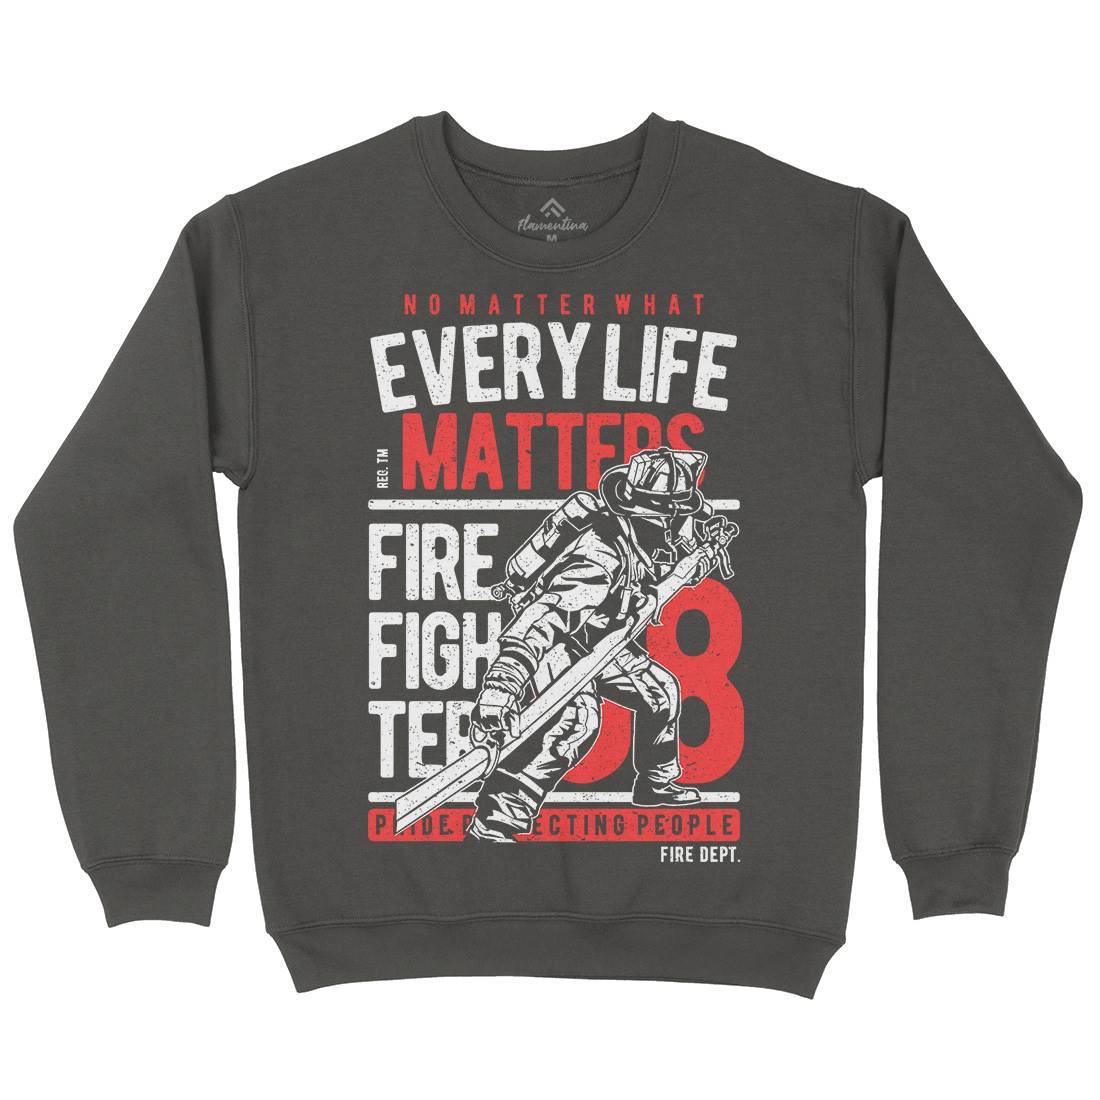 Every Life Matters Mens Crew Neck Sweatshirt Firefighters A650